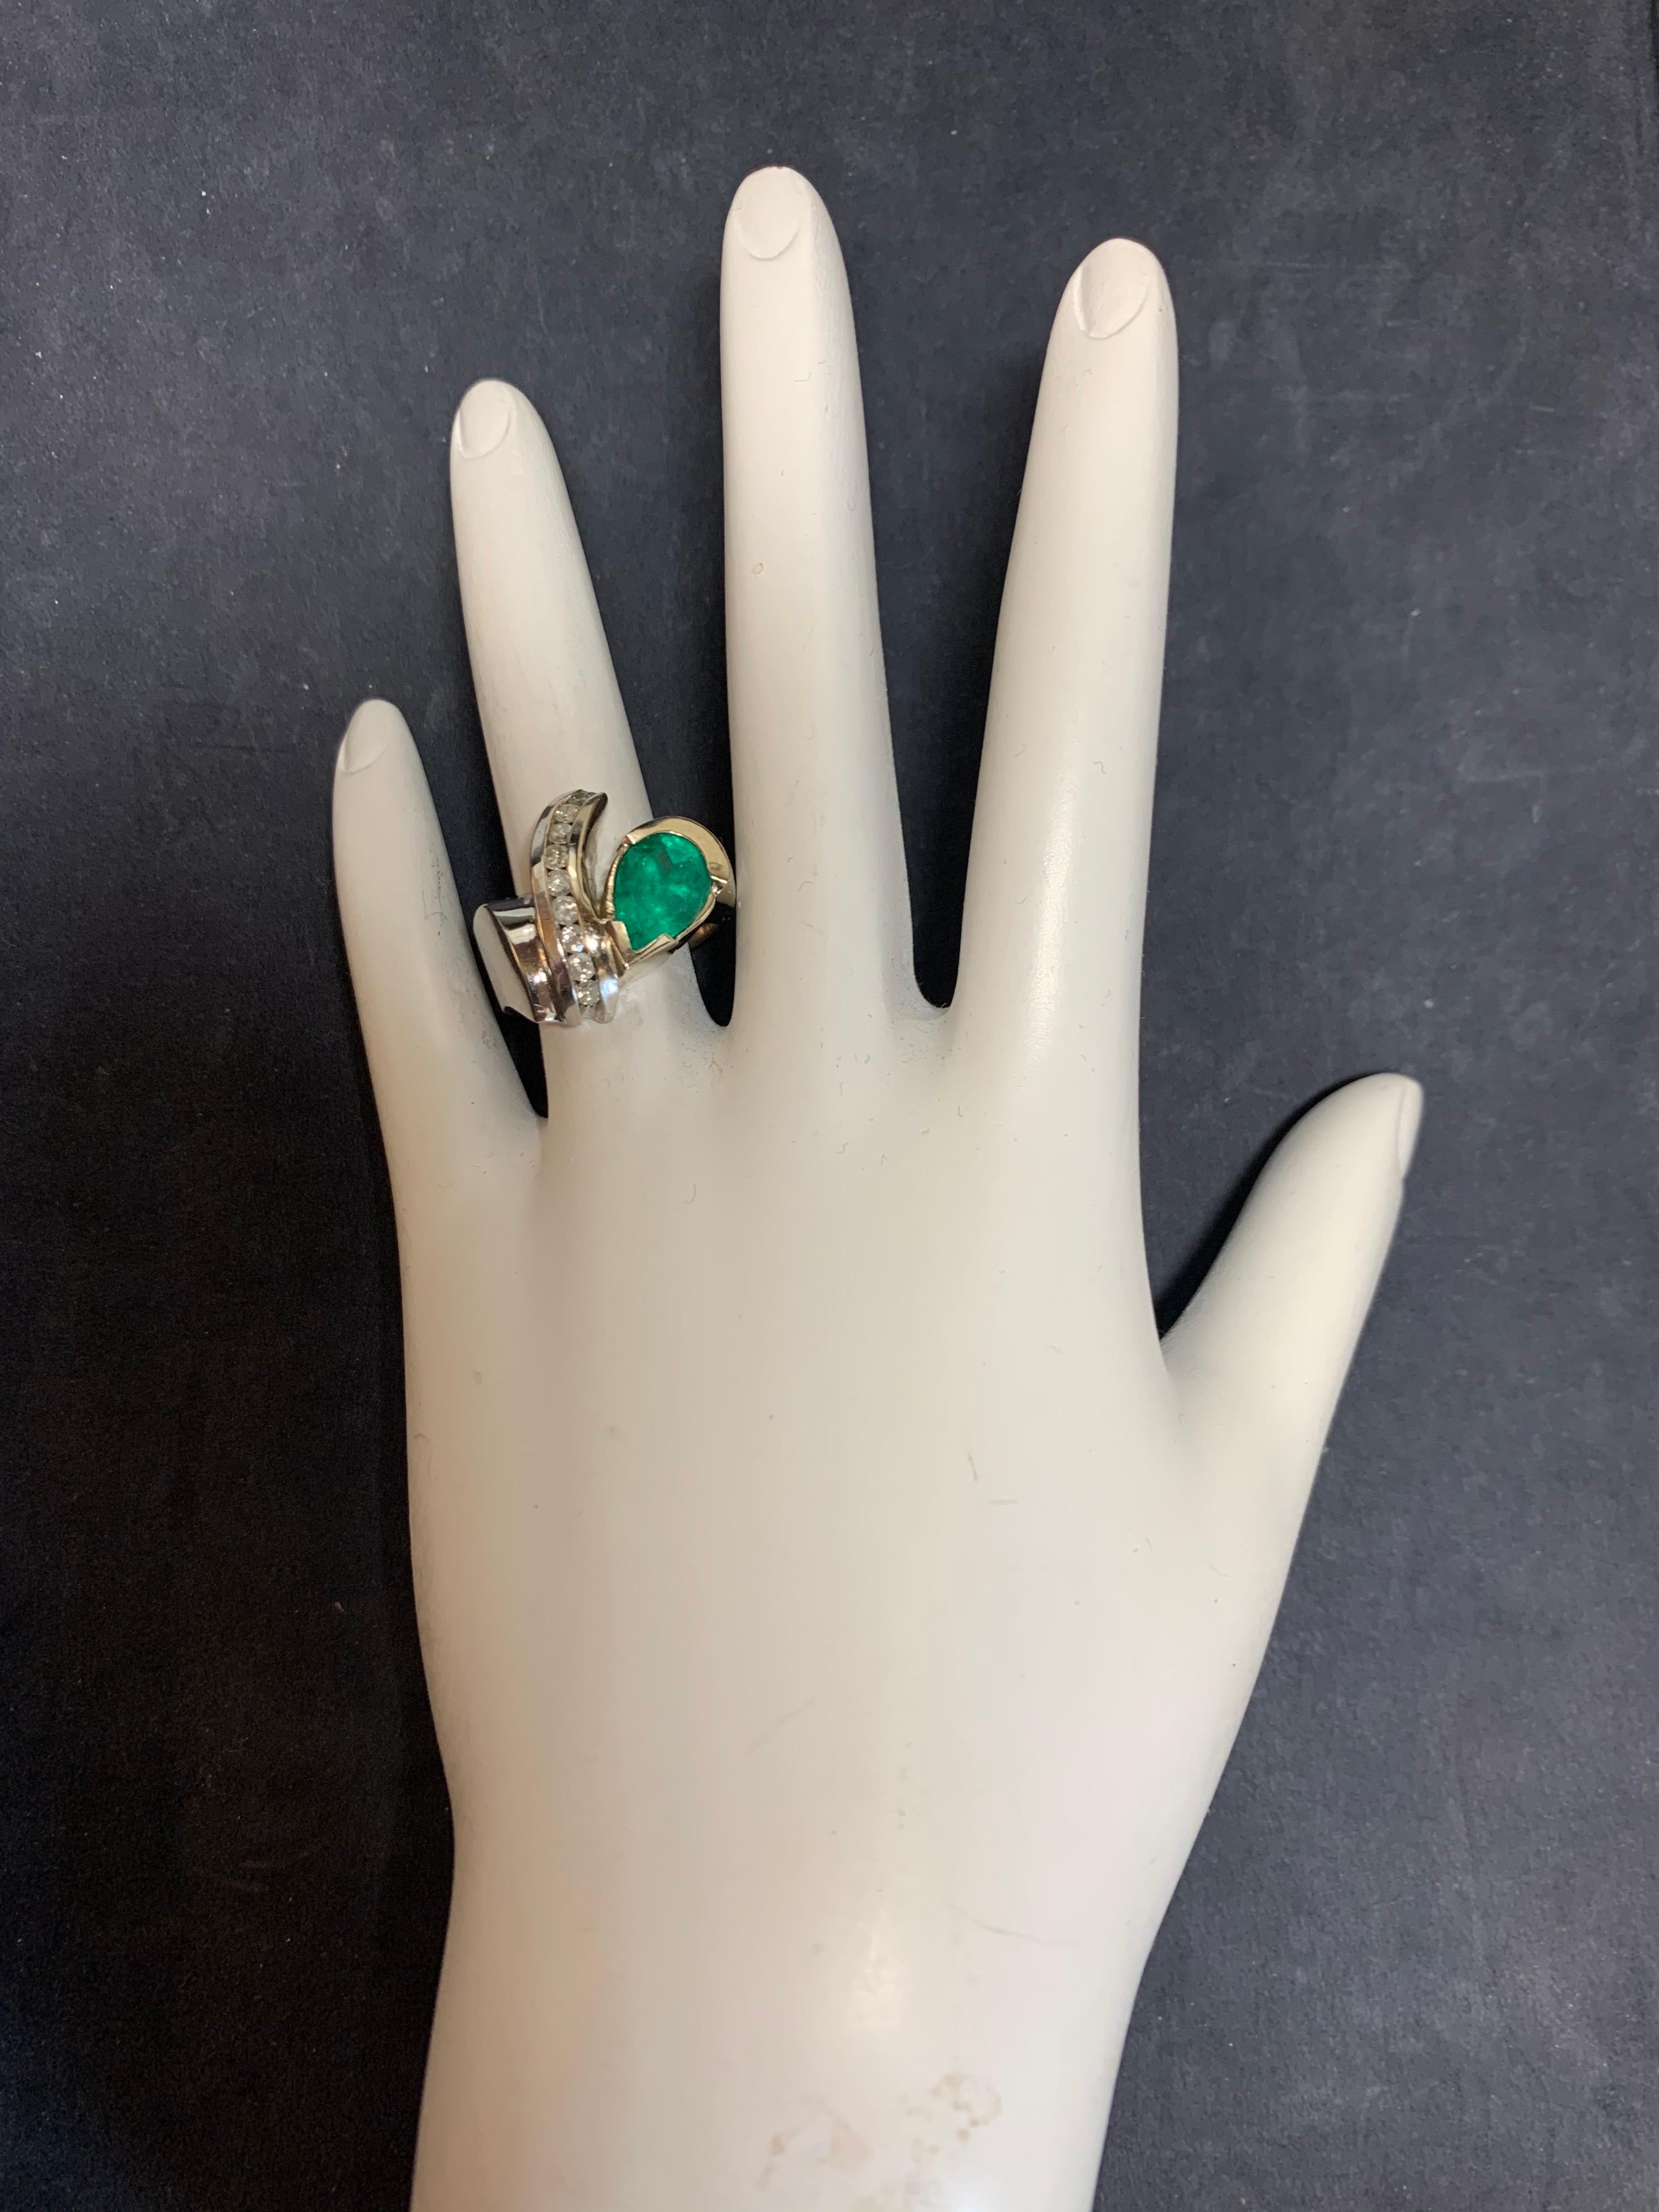 Modern 14k White Gold Cocktail Ring. Set with an approximately 2.75 carat Pear Shaped Emerald (11x7x5.8mm) and 9 natural round brilliant diamonds weighing approximately 0.50 carats, H in color, SI in clarity. 

The ring size is a 7, ring weight is